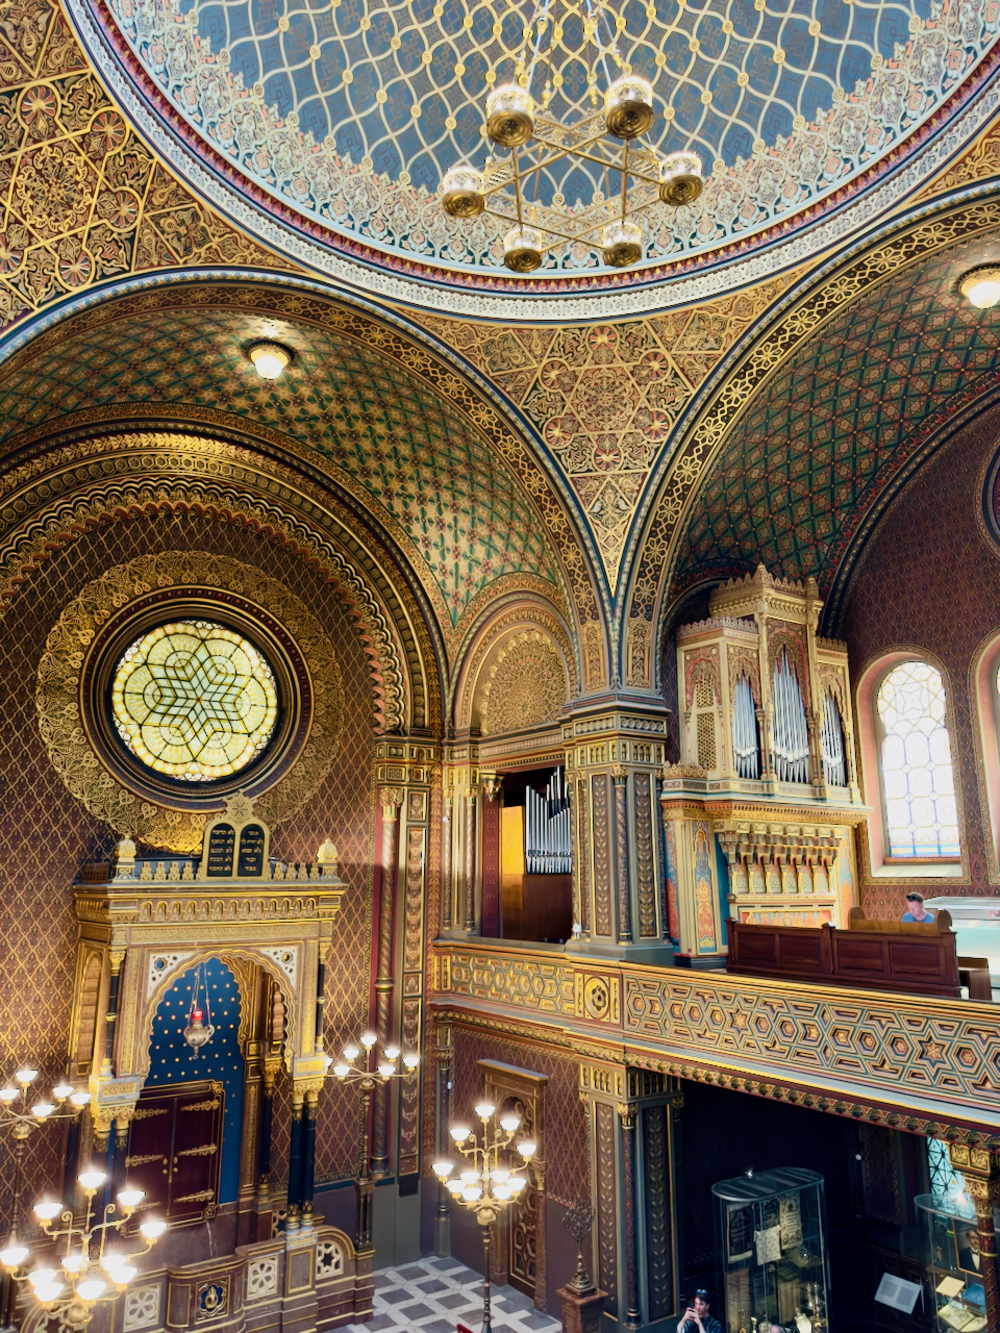 The Spanish synagogue in Prague, Czech Republic